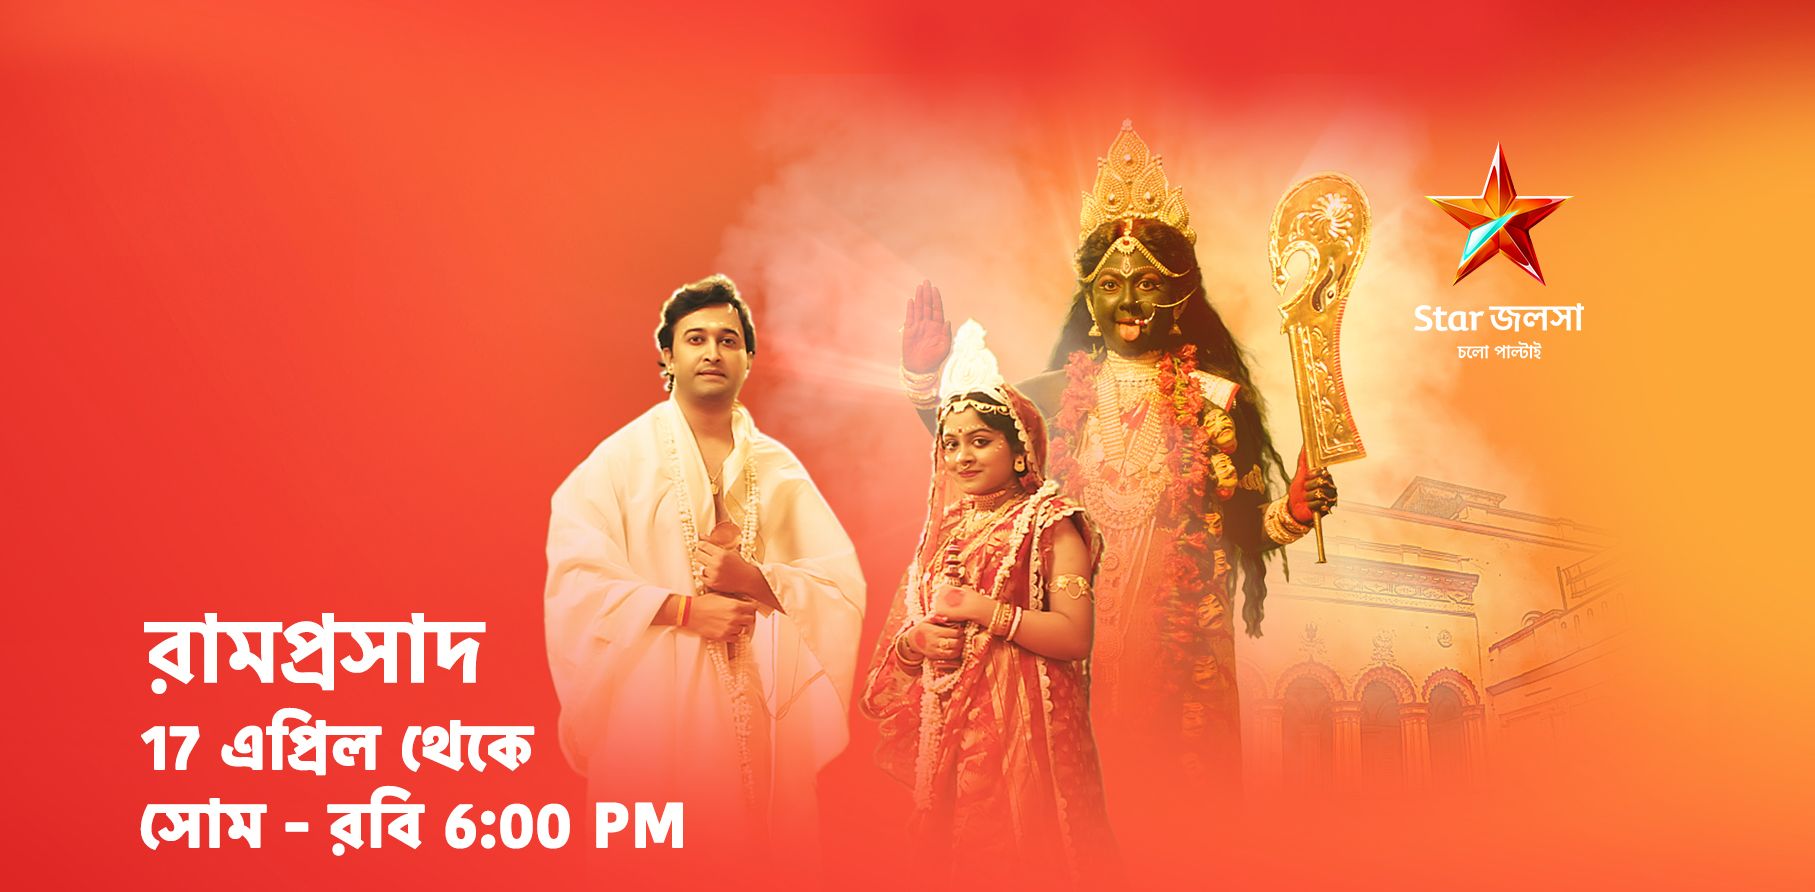 Ramprasad Serial On Star Jalsha Launching On 17 April Everyday At 06